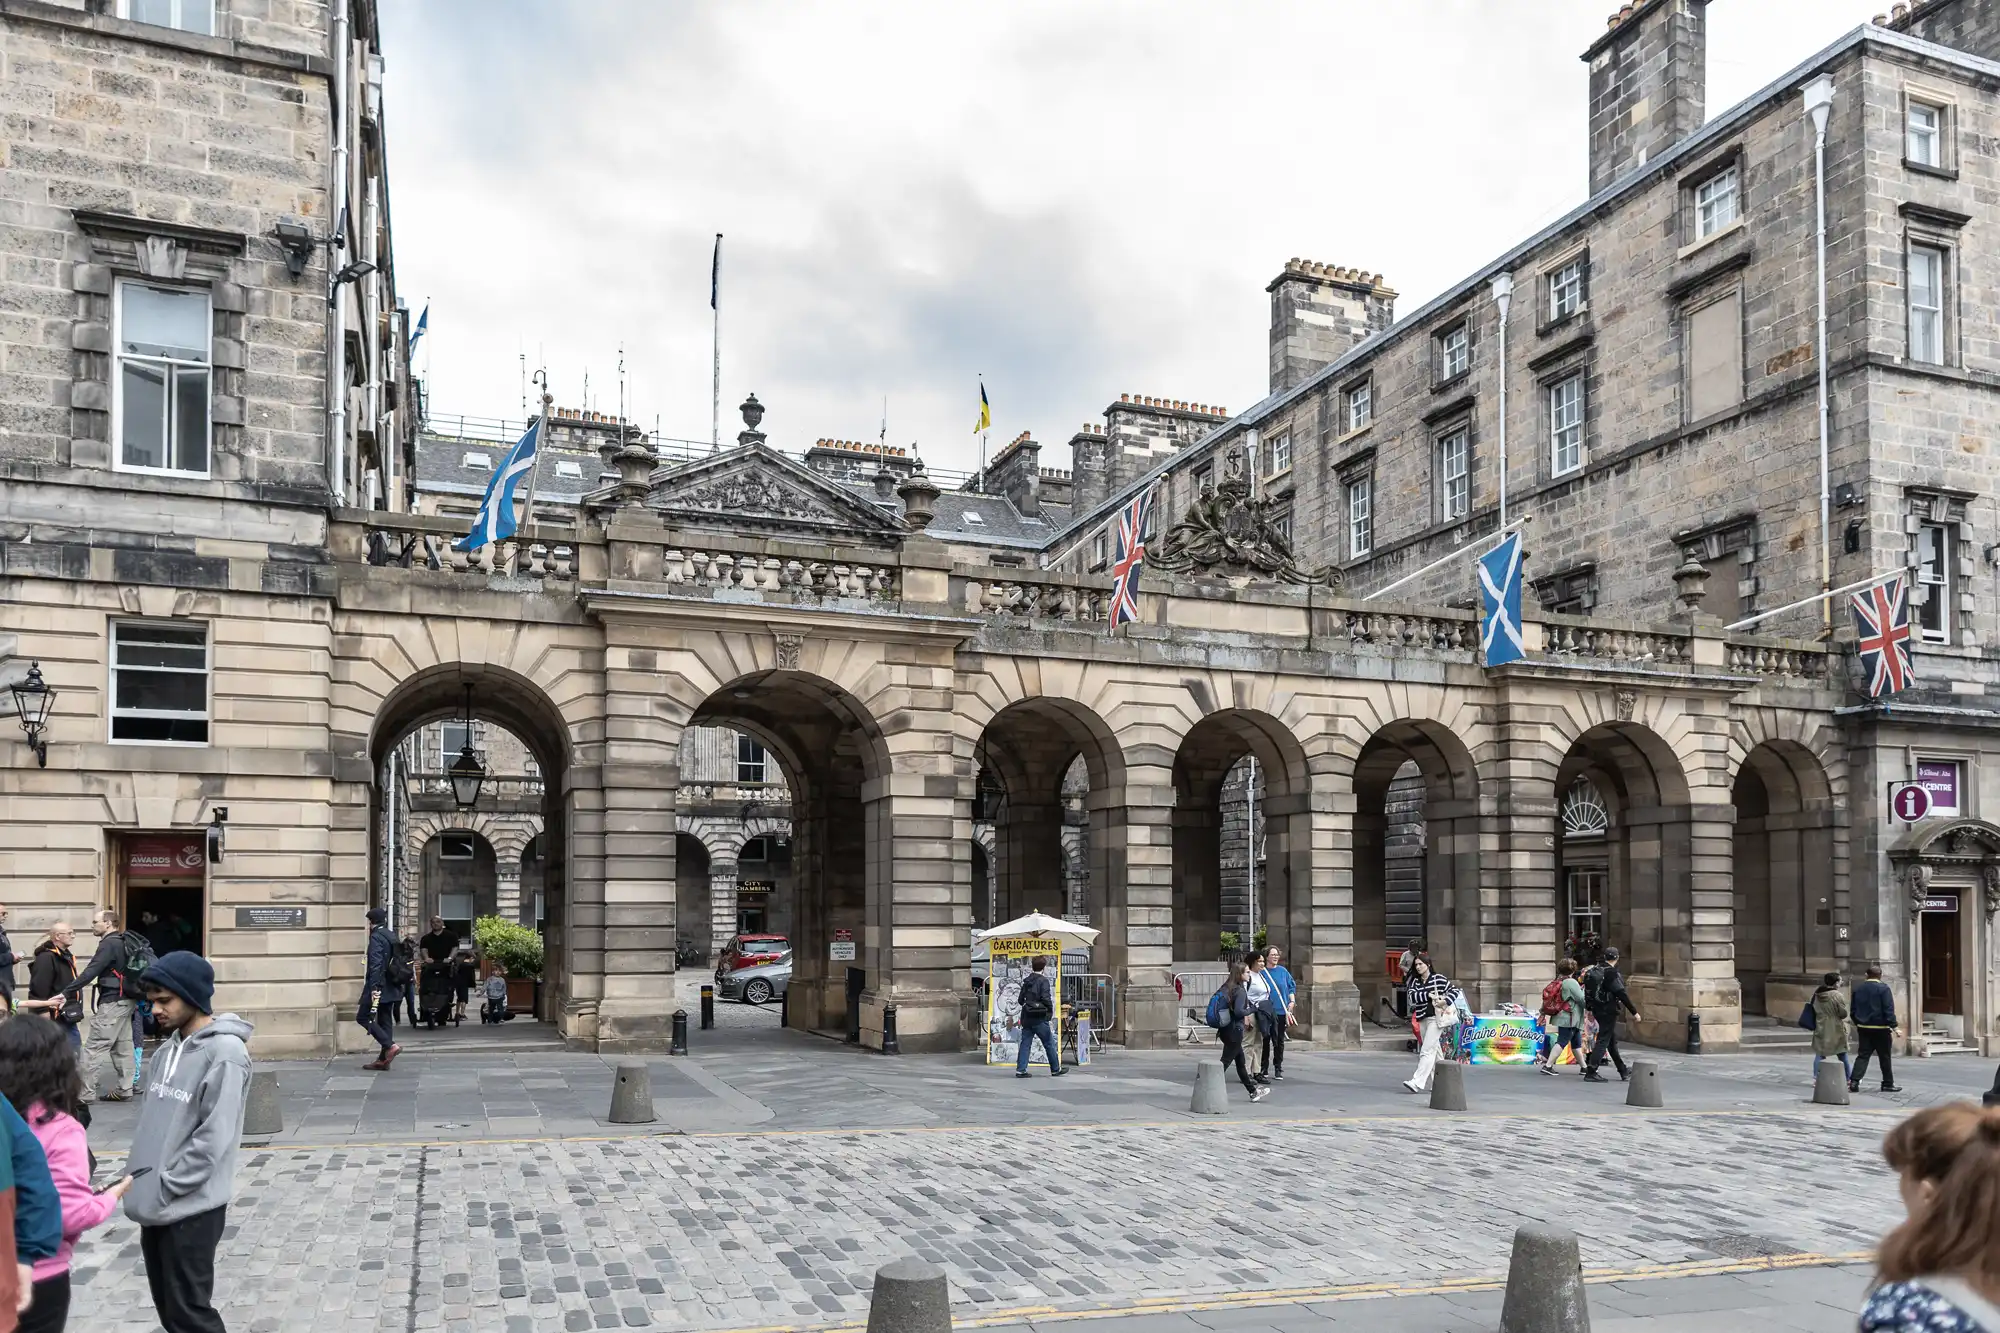 Historic stone building with arches, adorned with Scottish flags and Union Jacks, situated on a cobblestone street with pedestrians walking and street vendors visible.